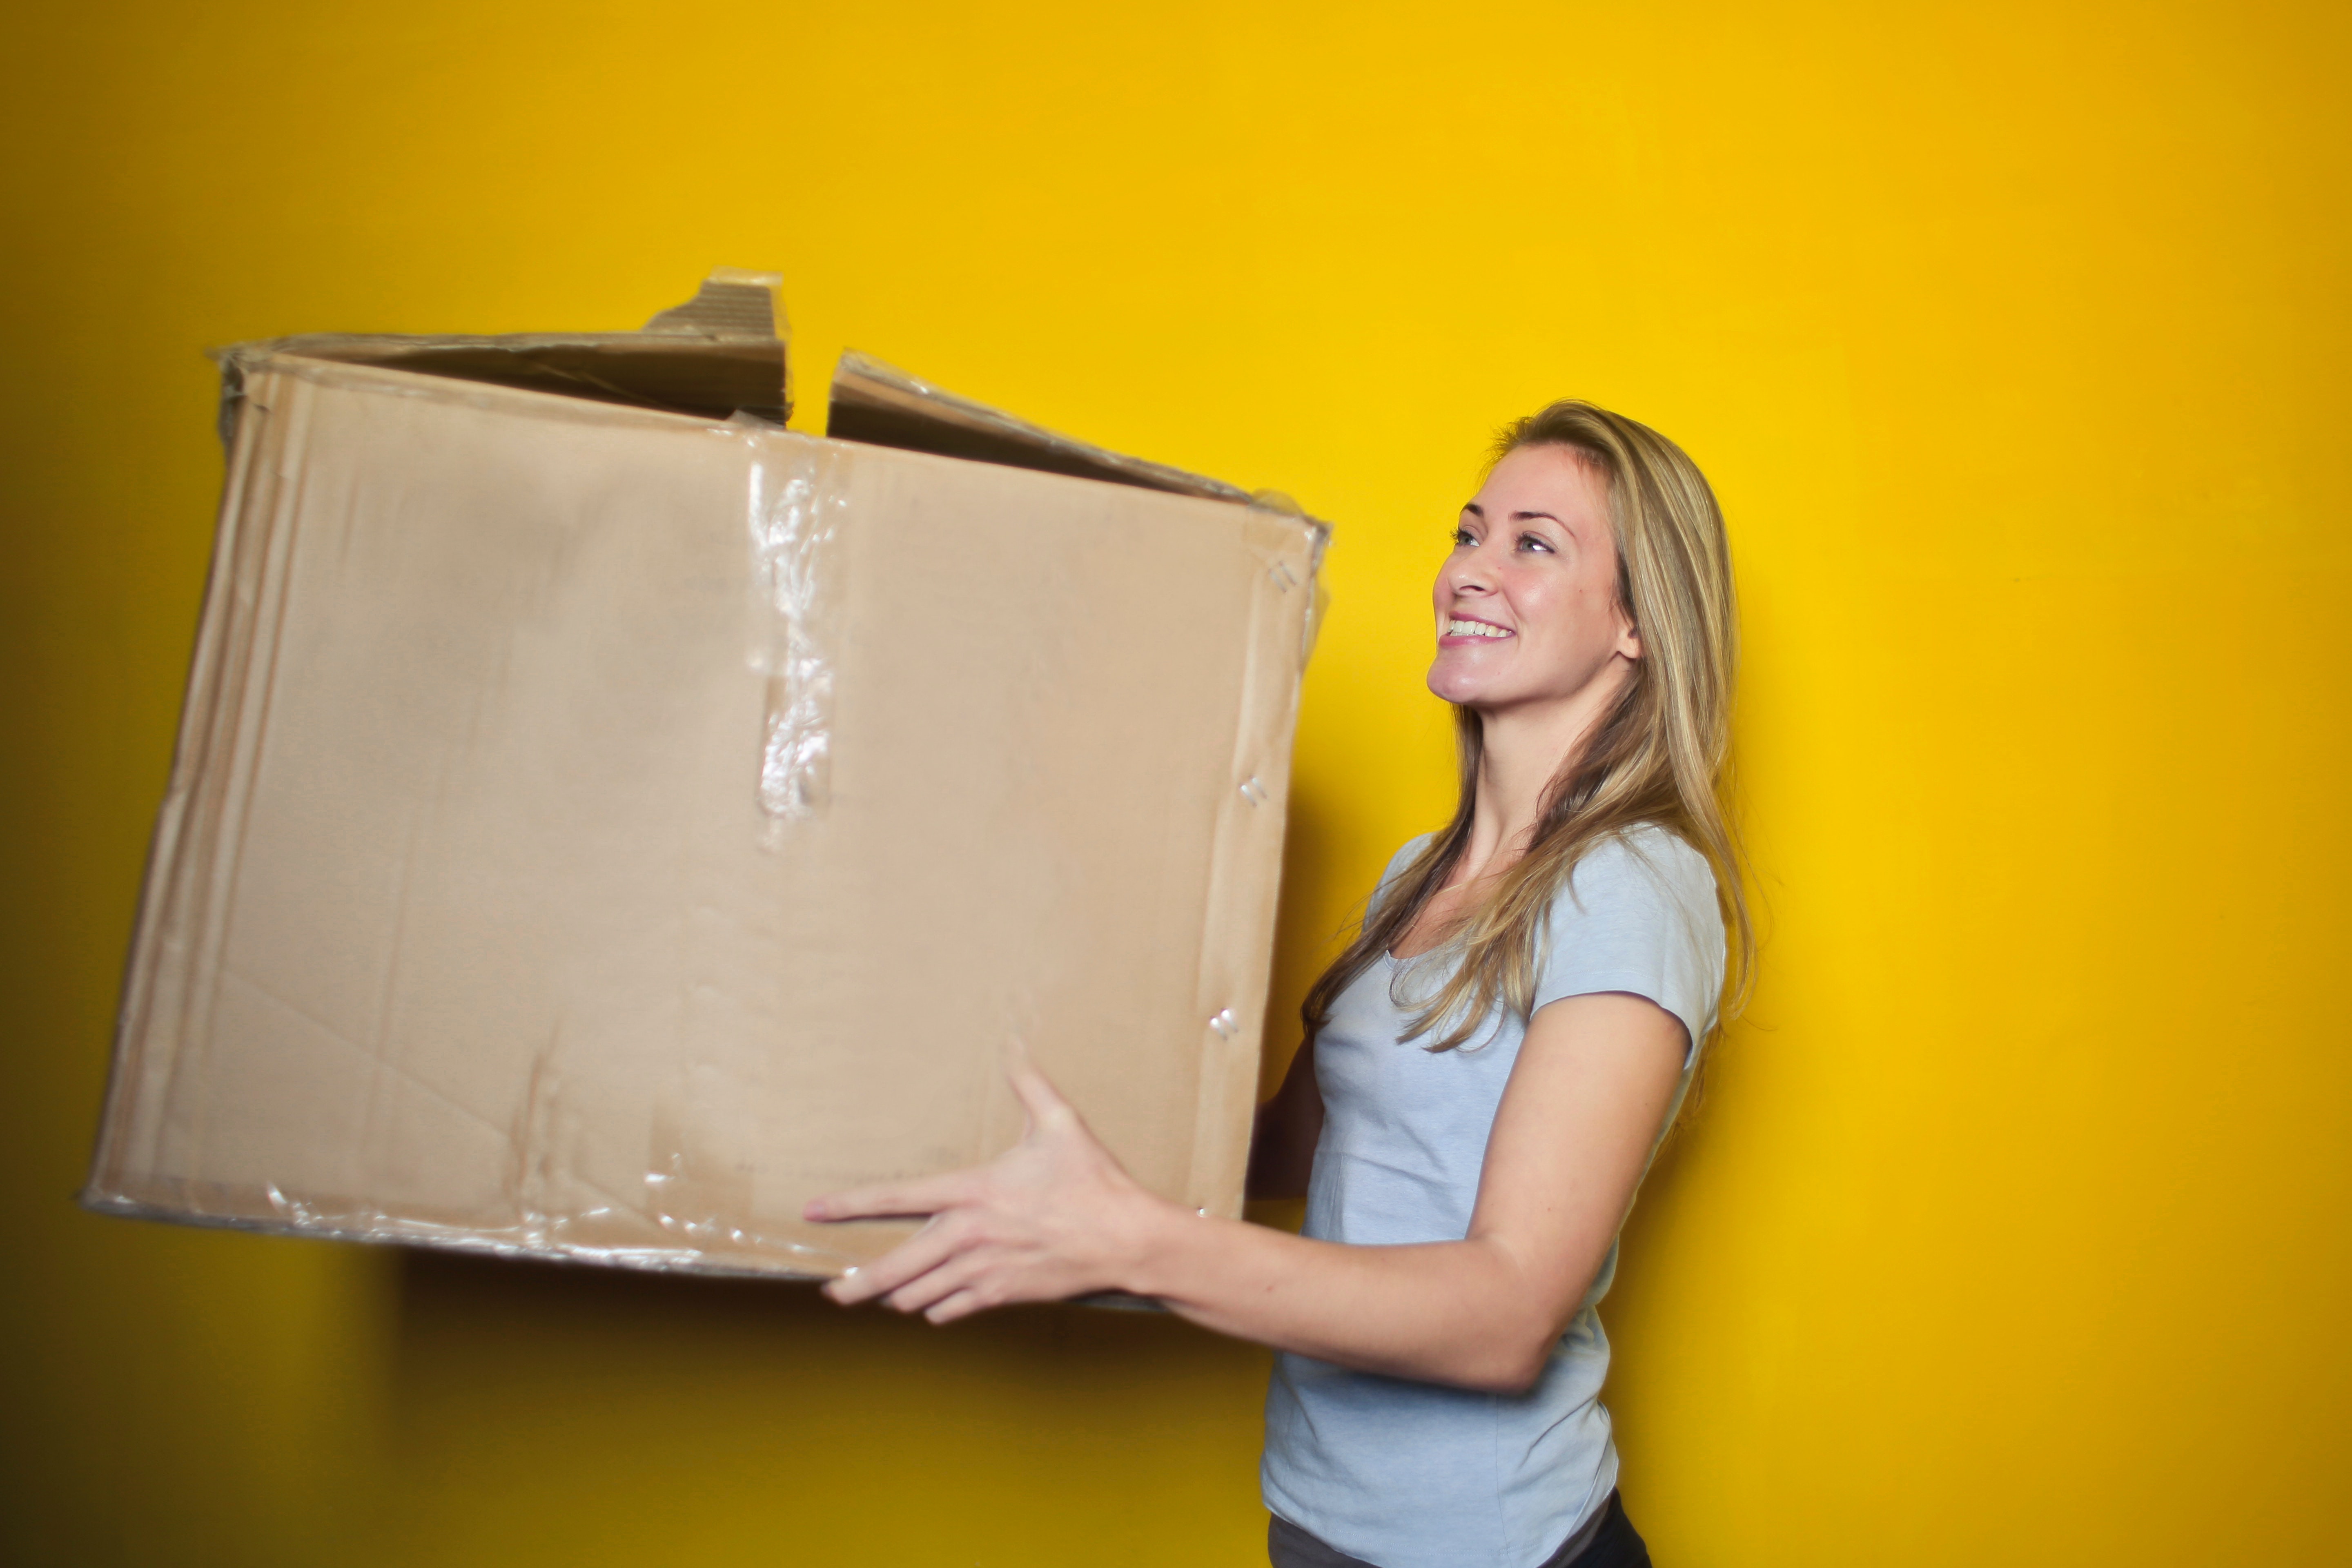 Woman carrying a large cardboard box